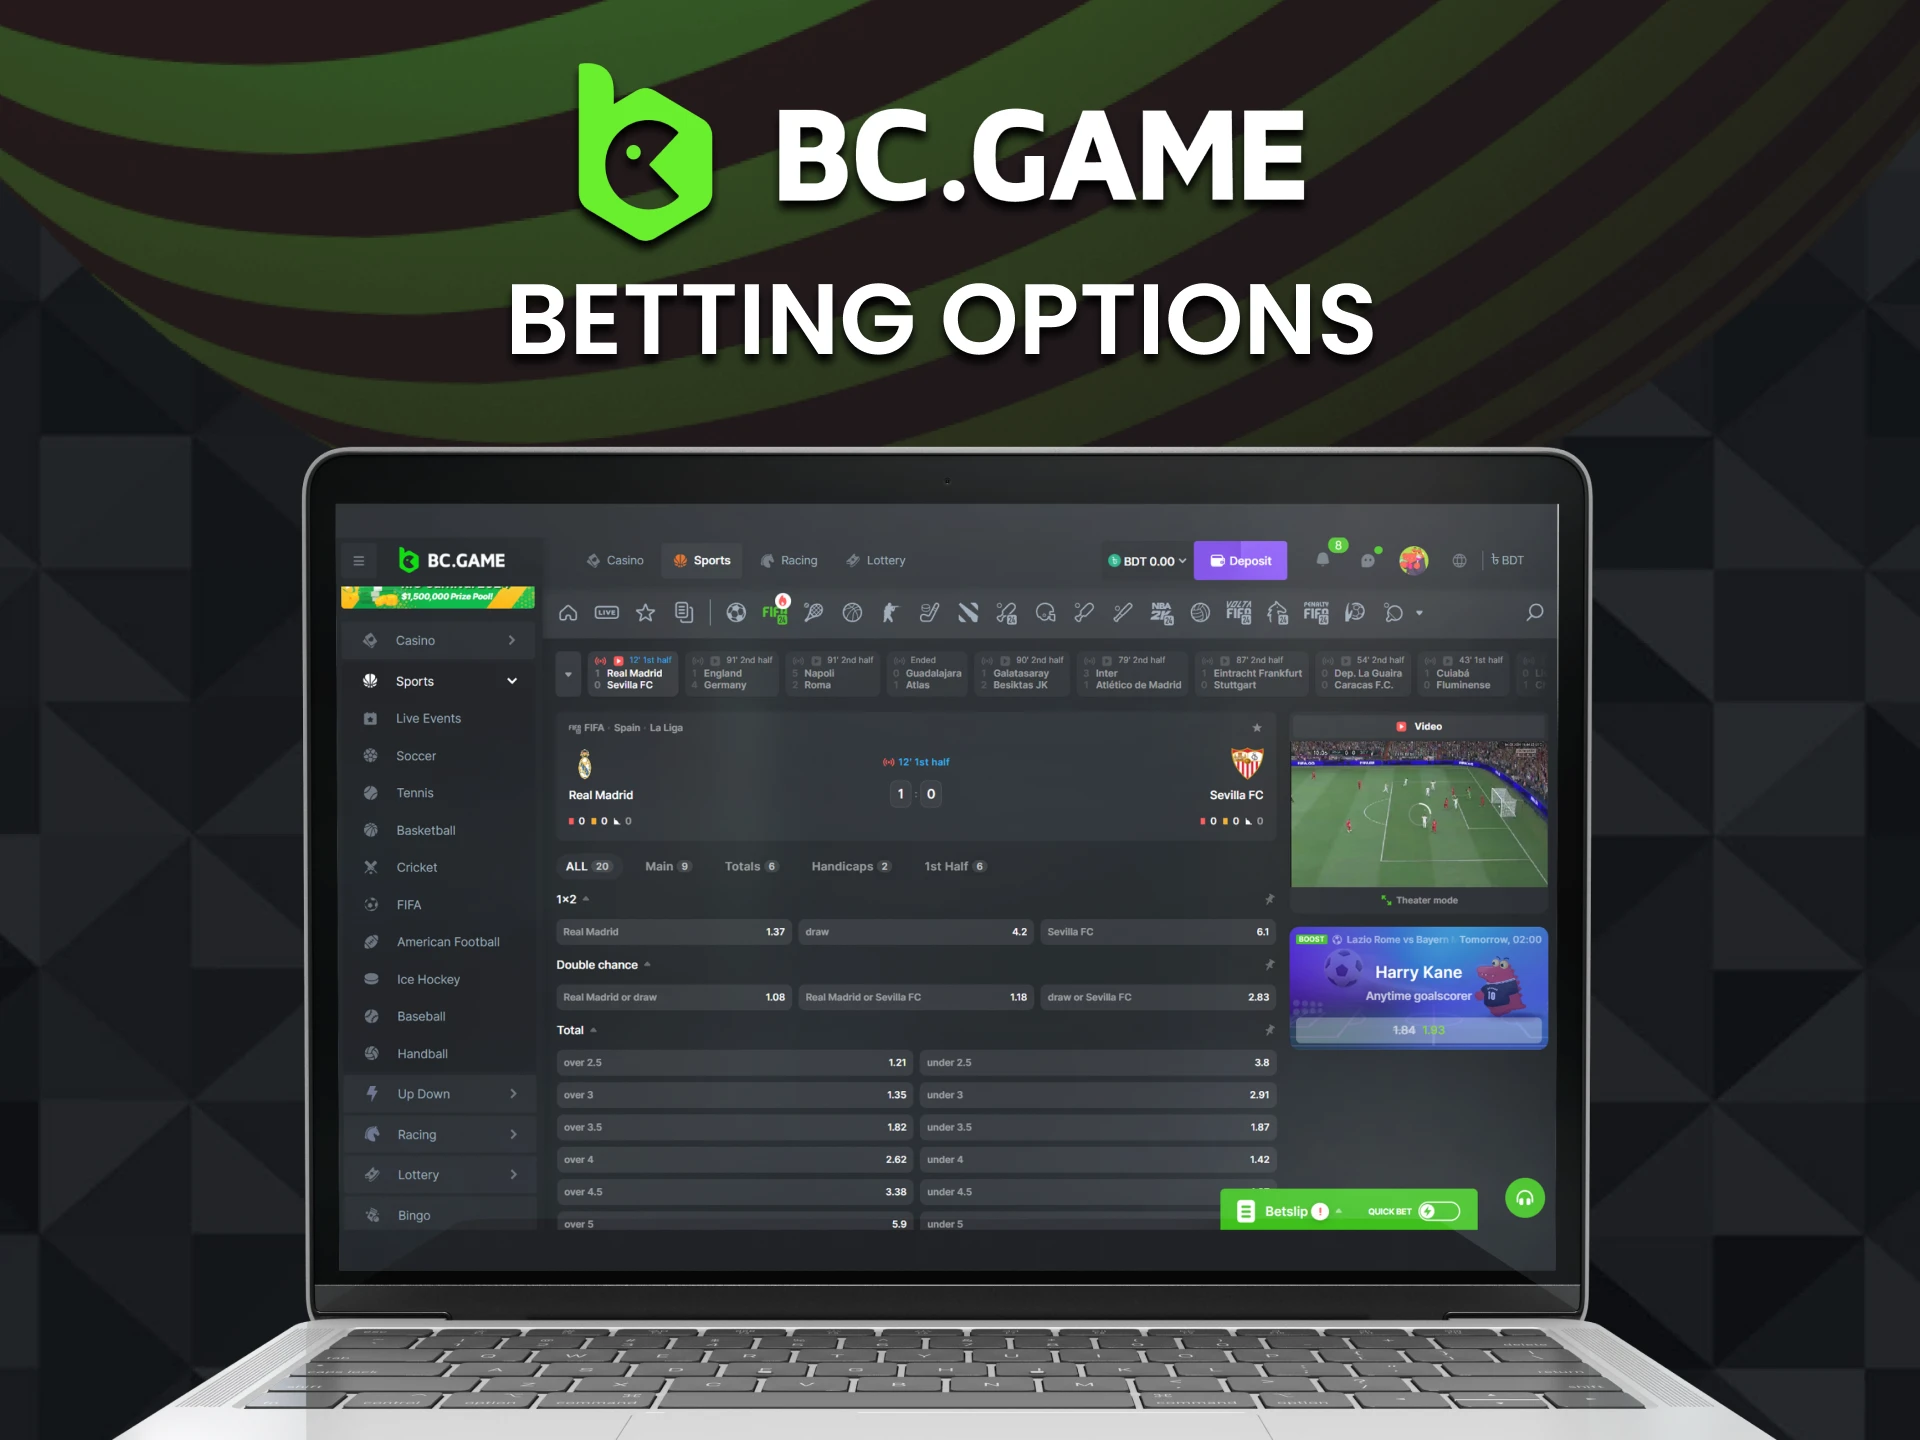 BC Game offers live betting, live previews, and line betting options.